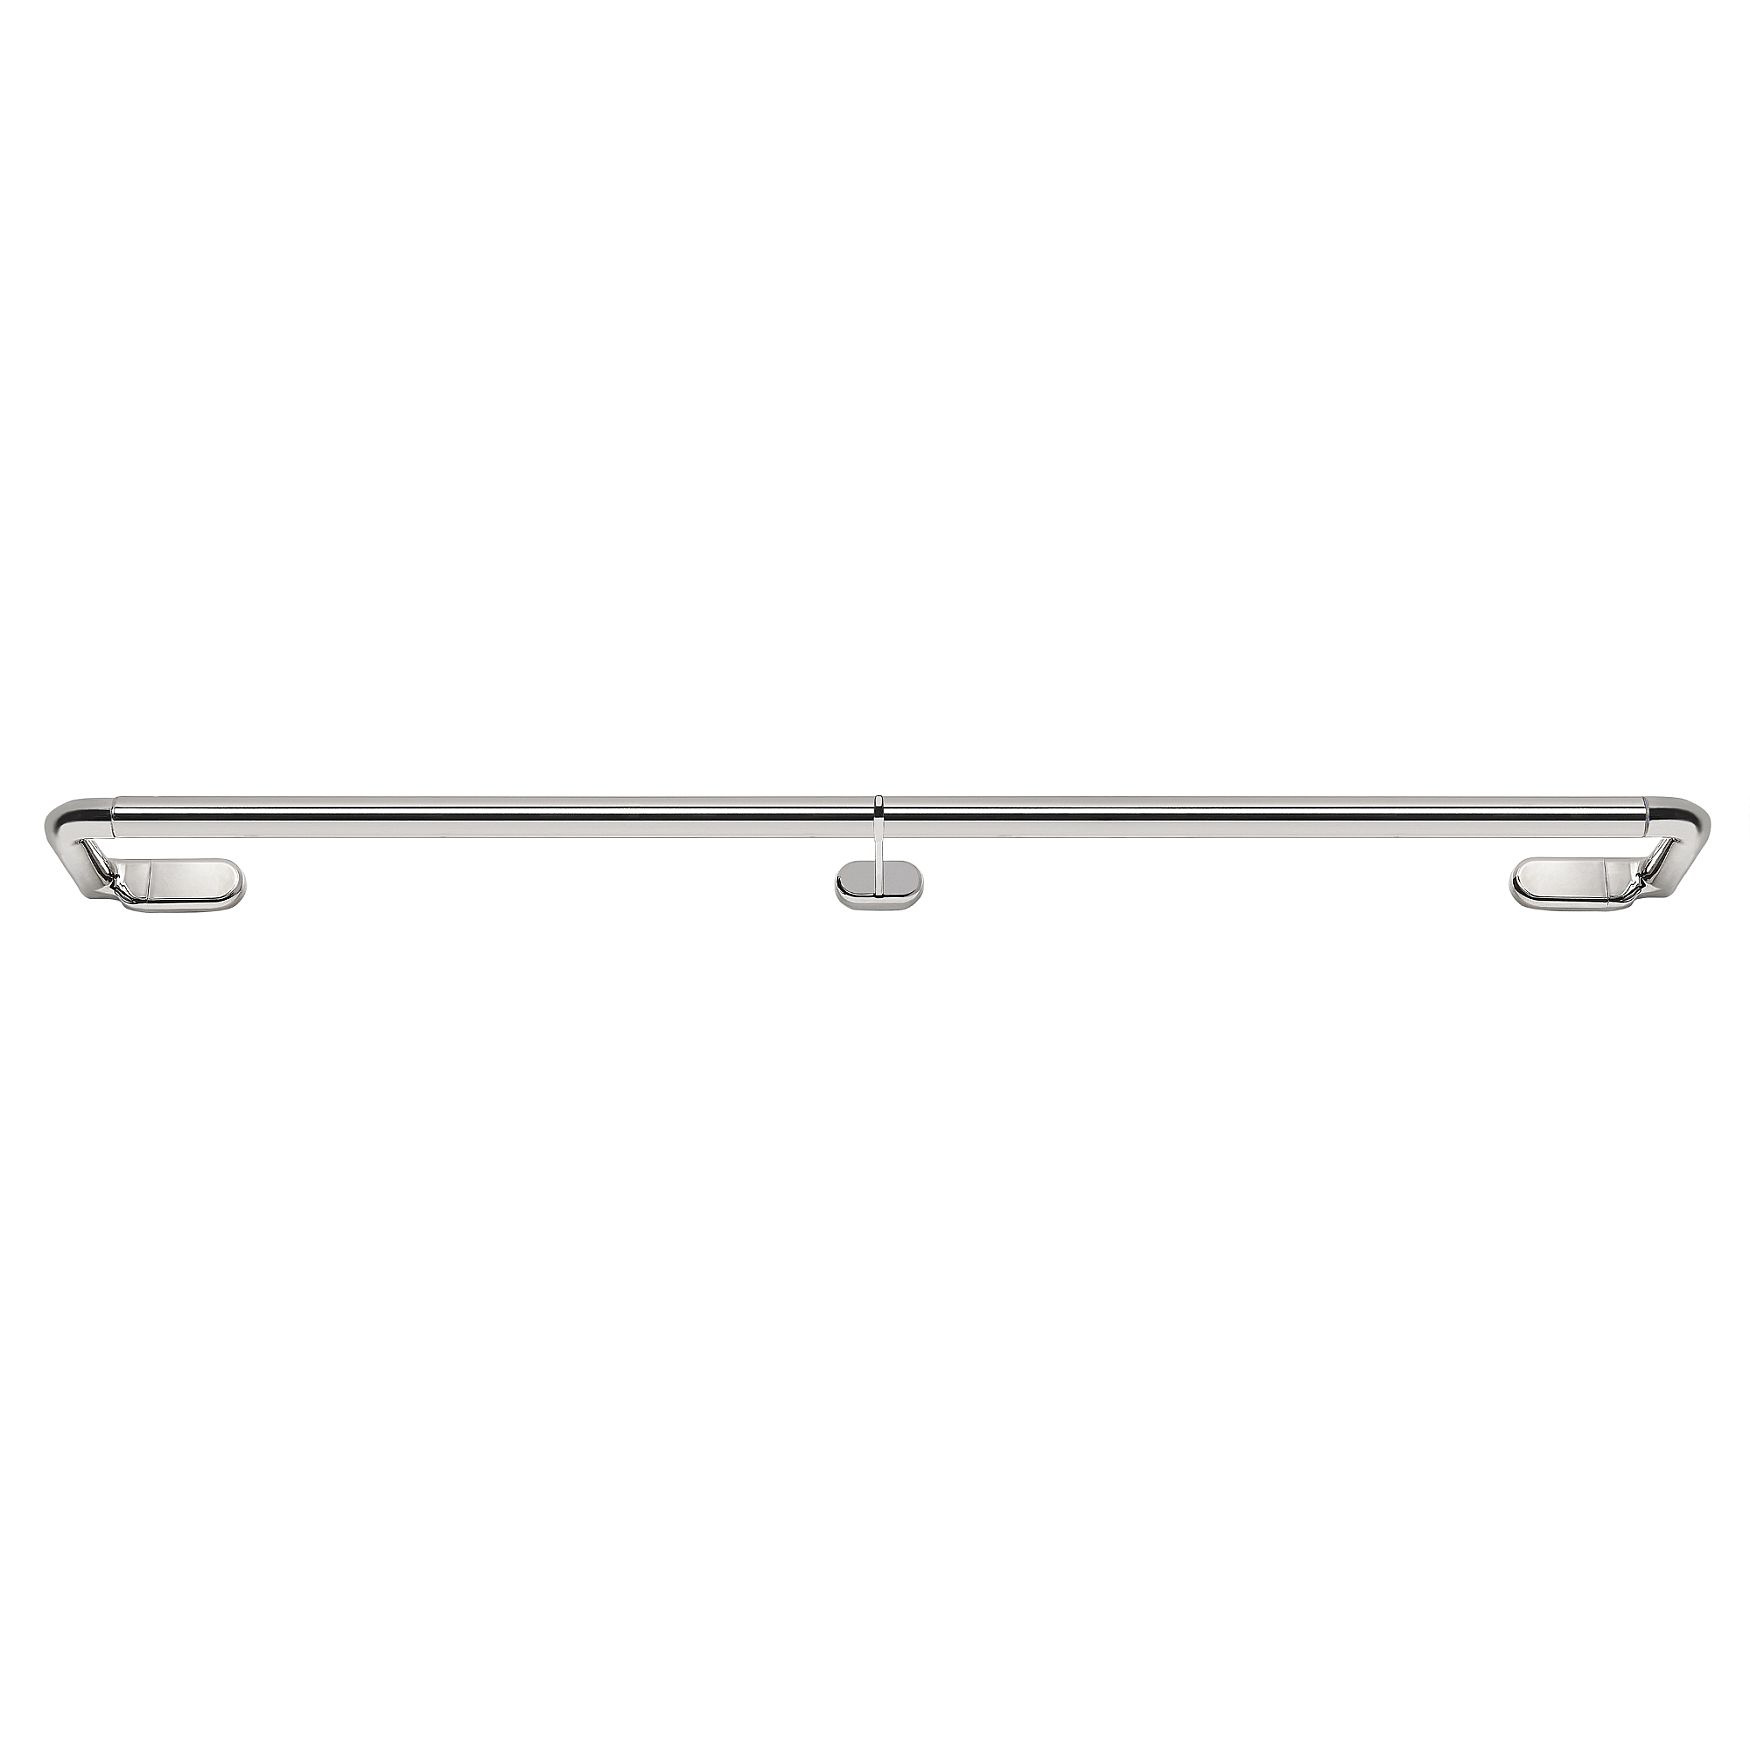 Innovative Wrap Around Curtain Rod - Dylan 36-66, BRUSHED NICKEL